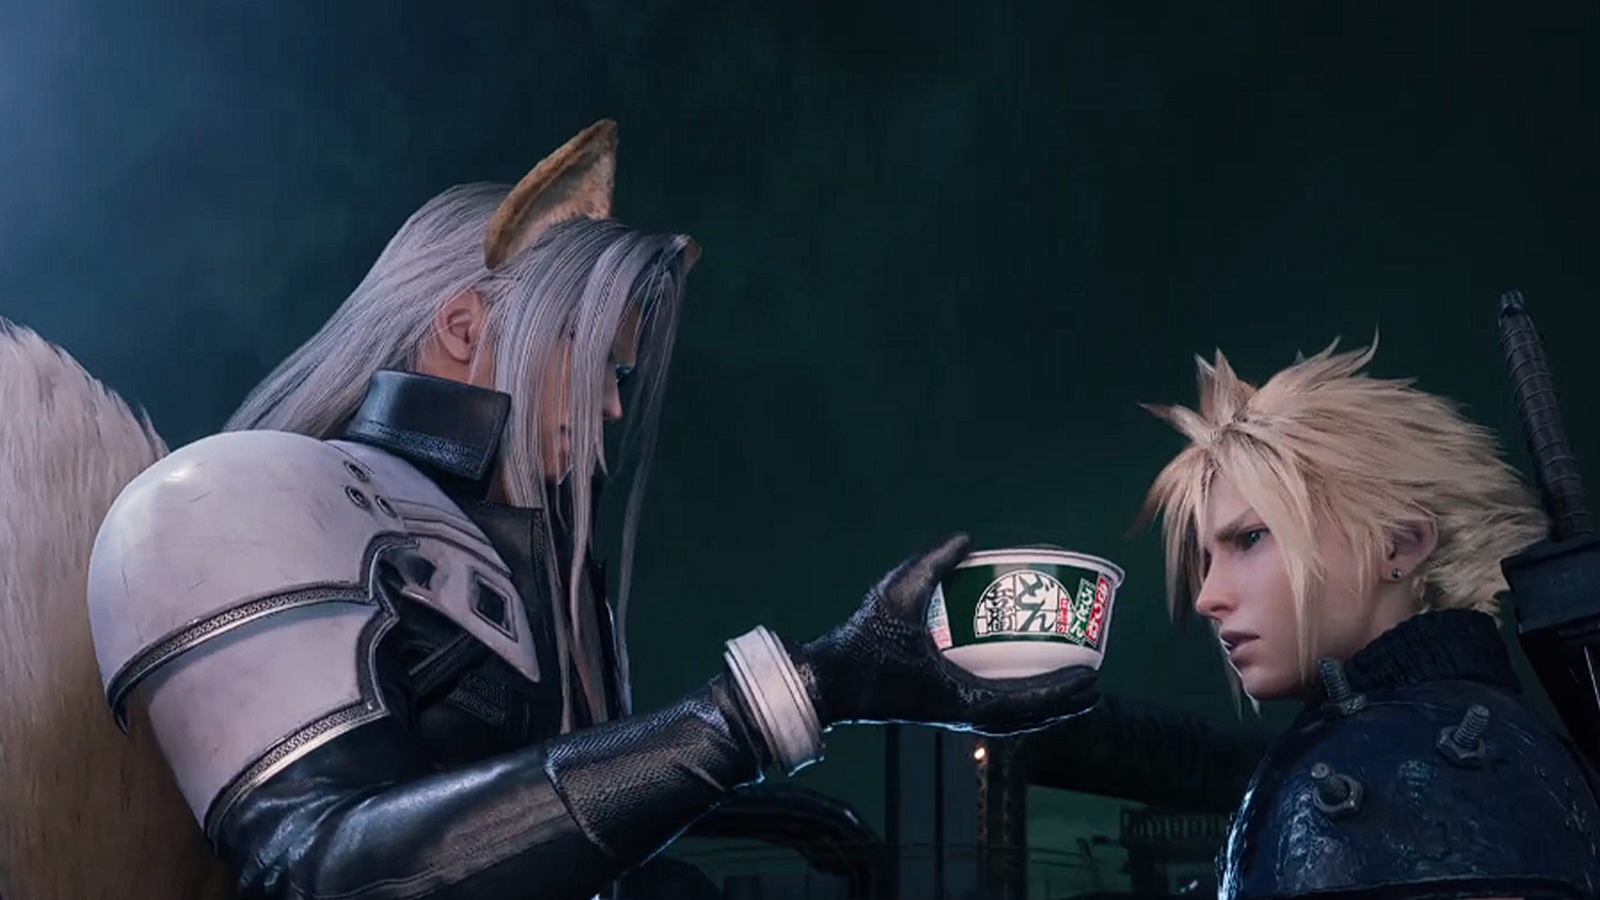 Sephiroth gifts Cloud some Udon Noodles